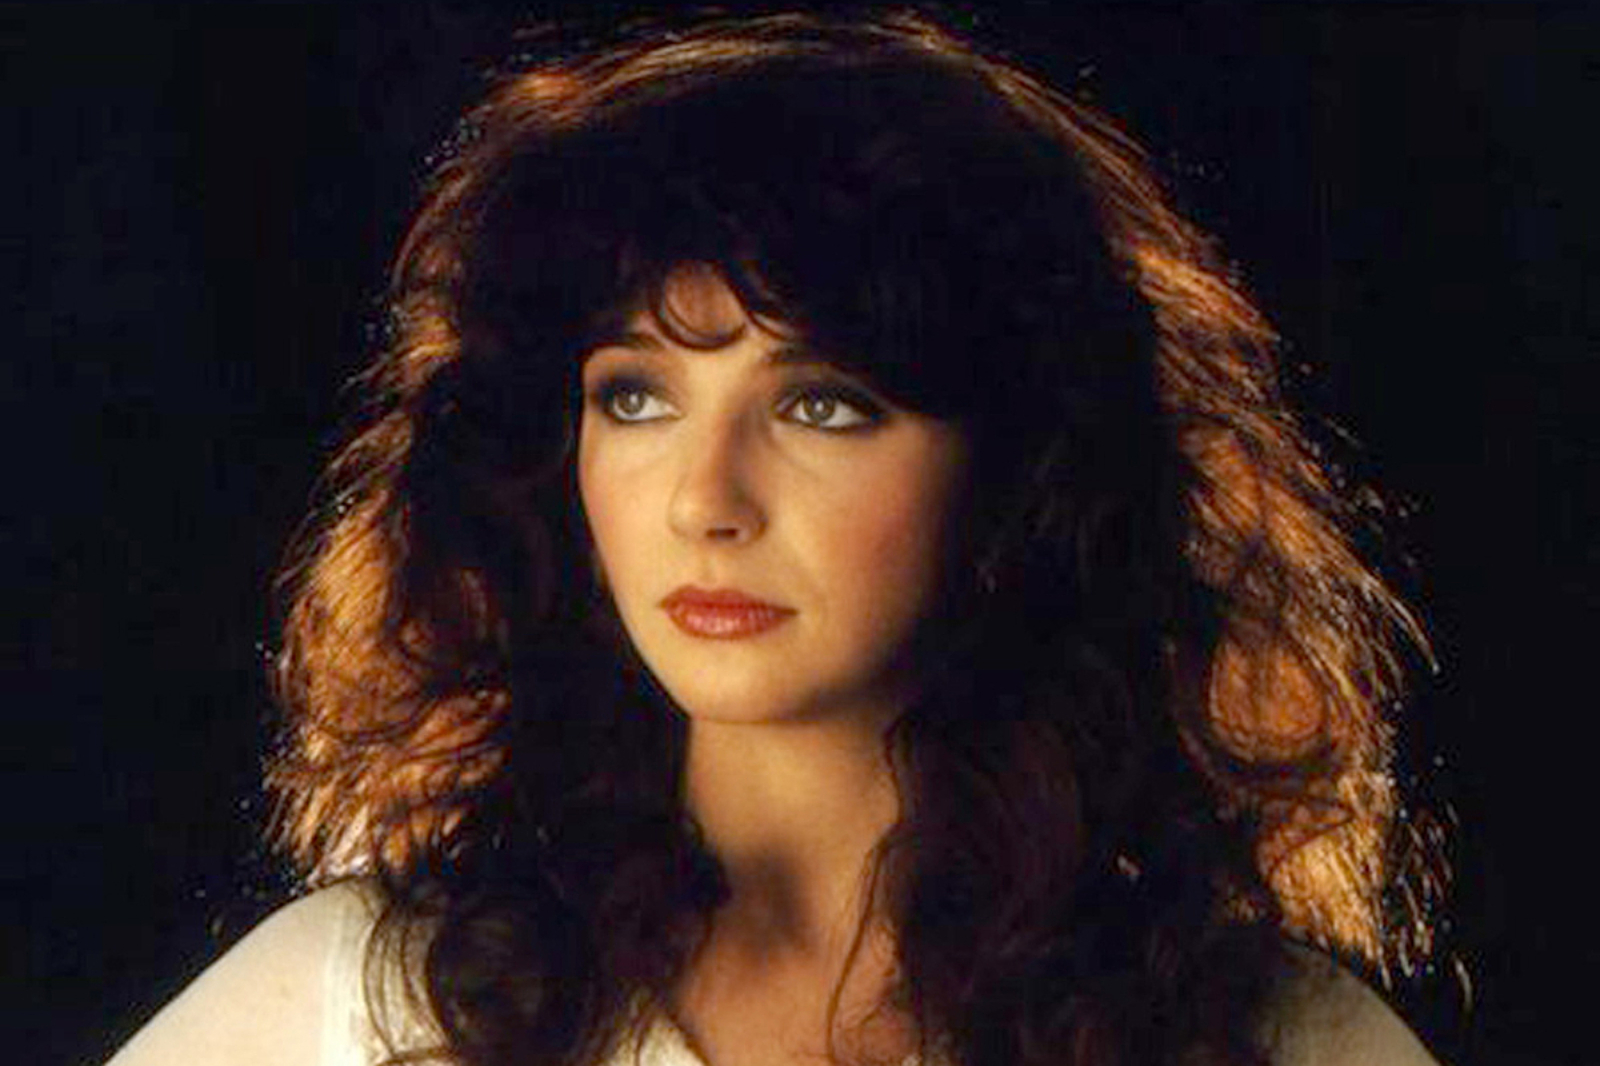 Kate Bush is to release remastered versions of her studio albums for the first time